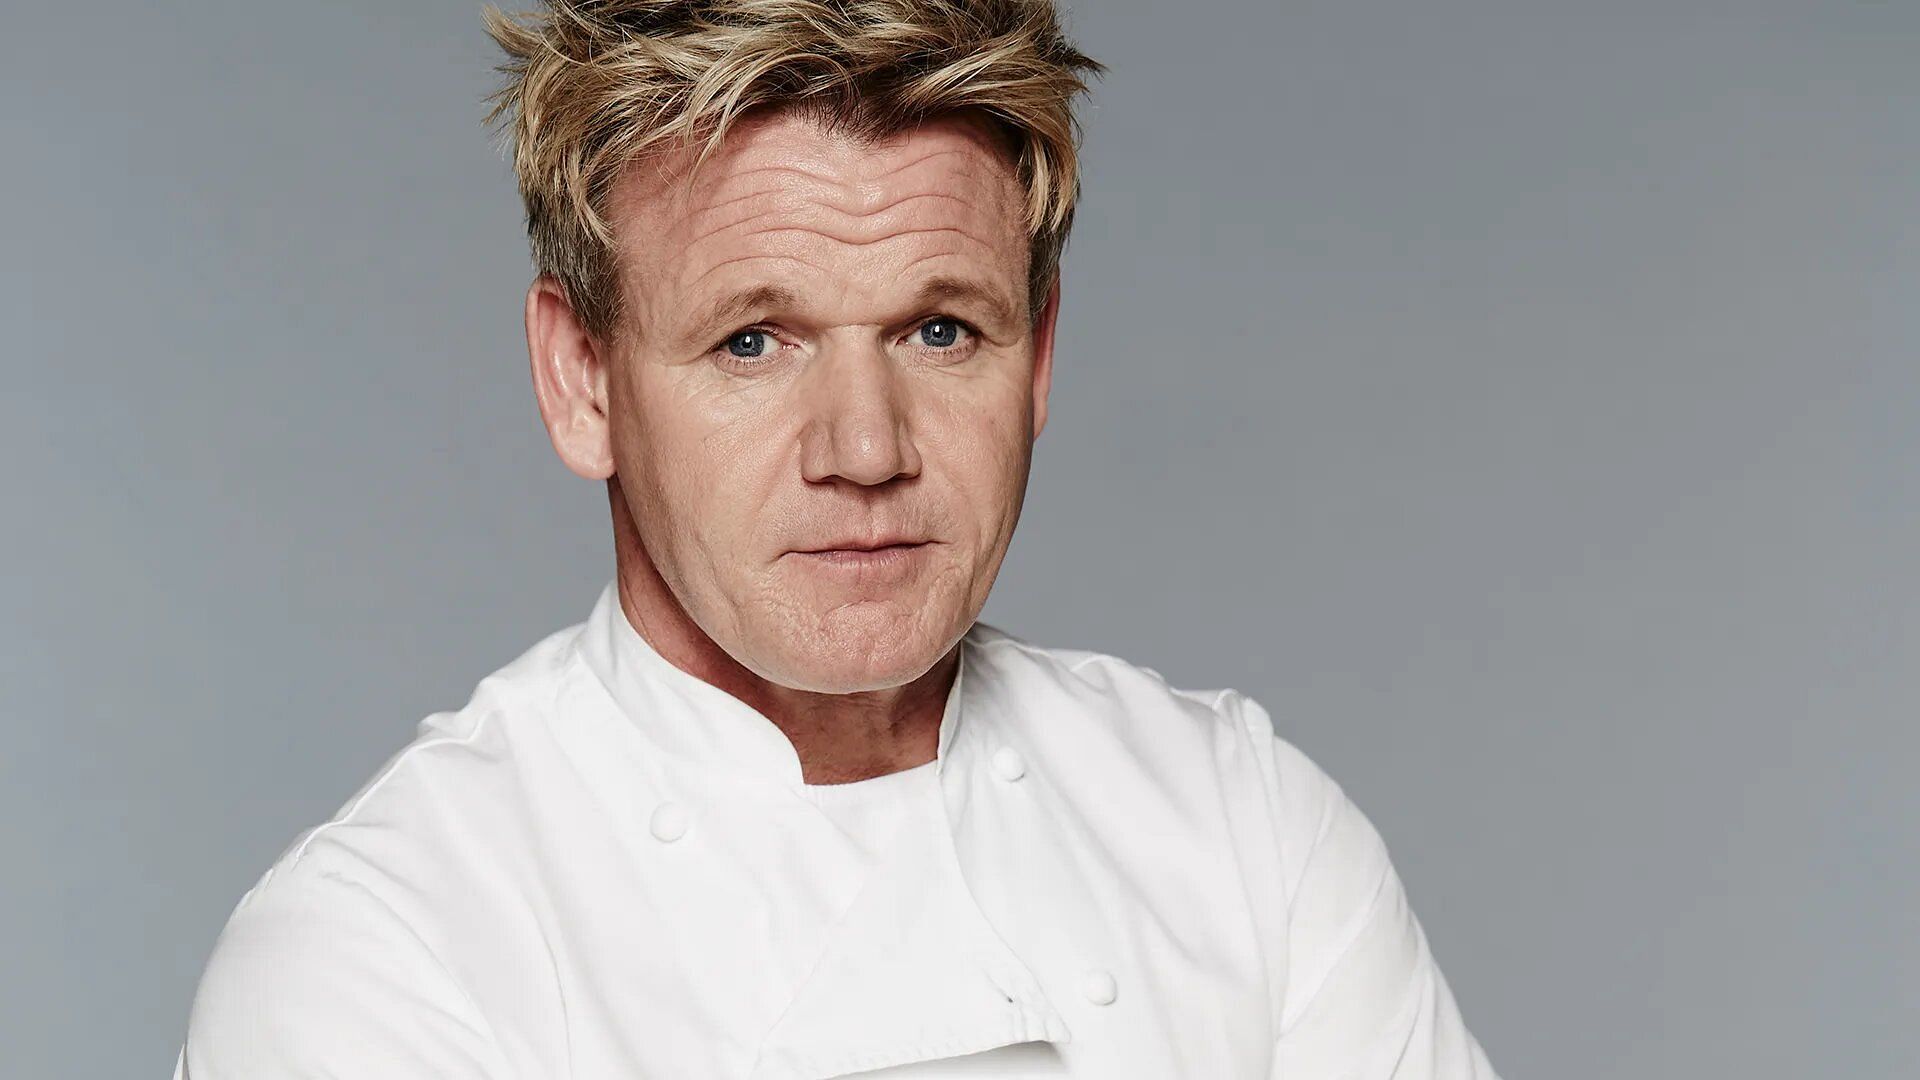 Celebrated chef Gordon Ramsay was one of the first members of Threads (Image via British GQ)